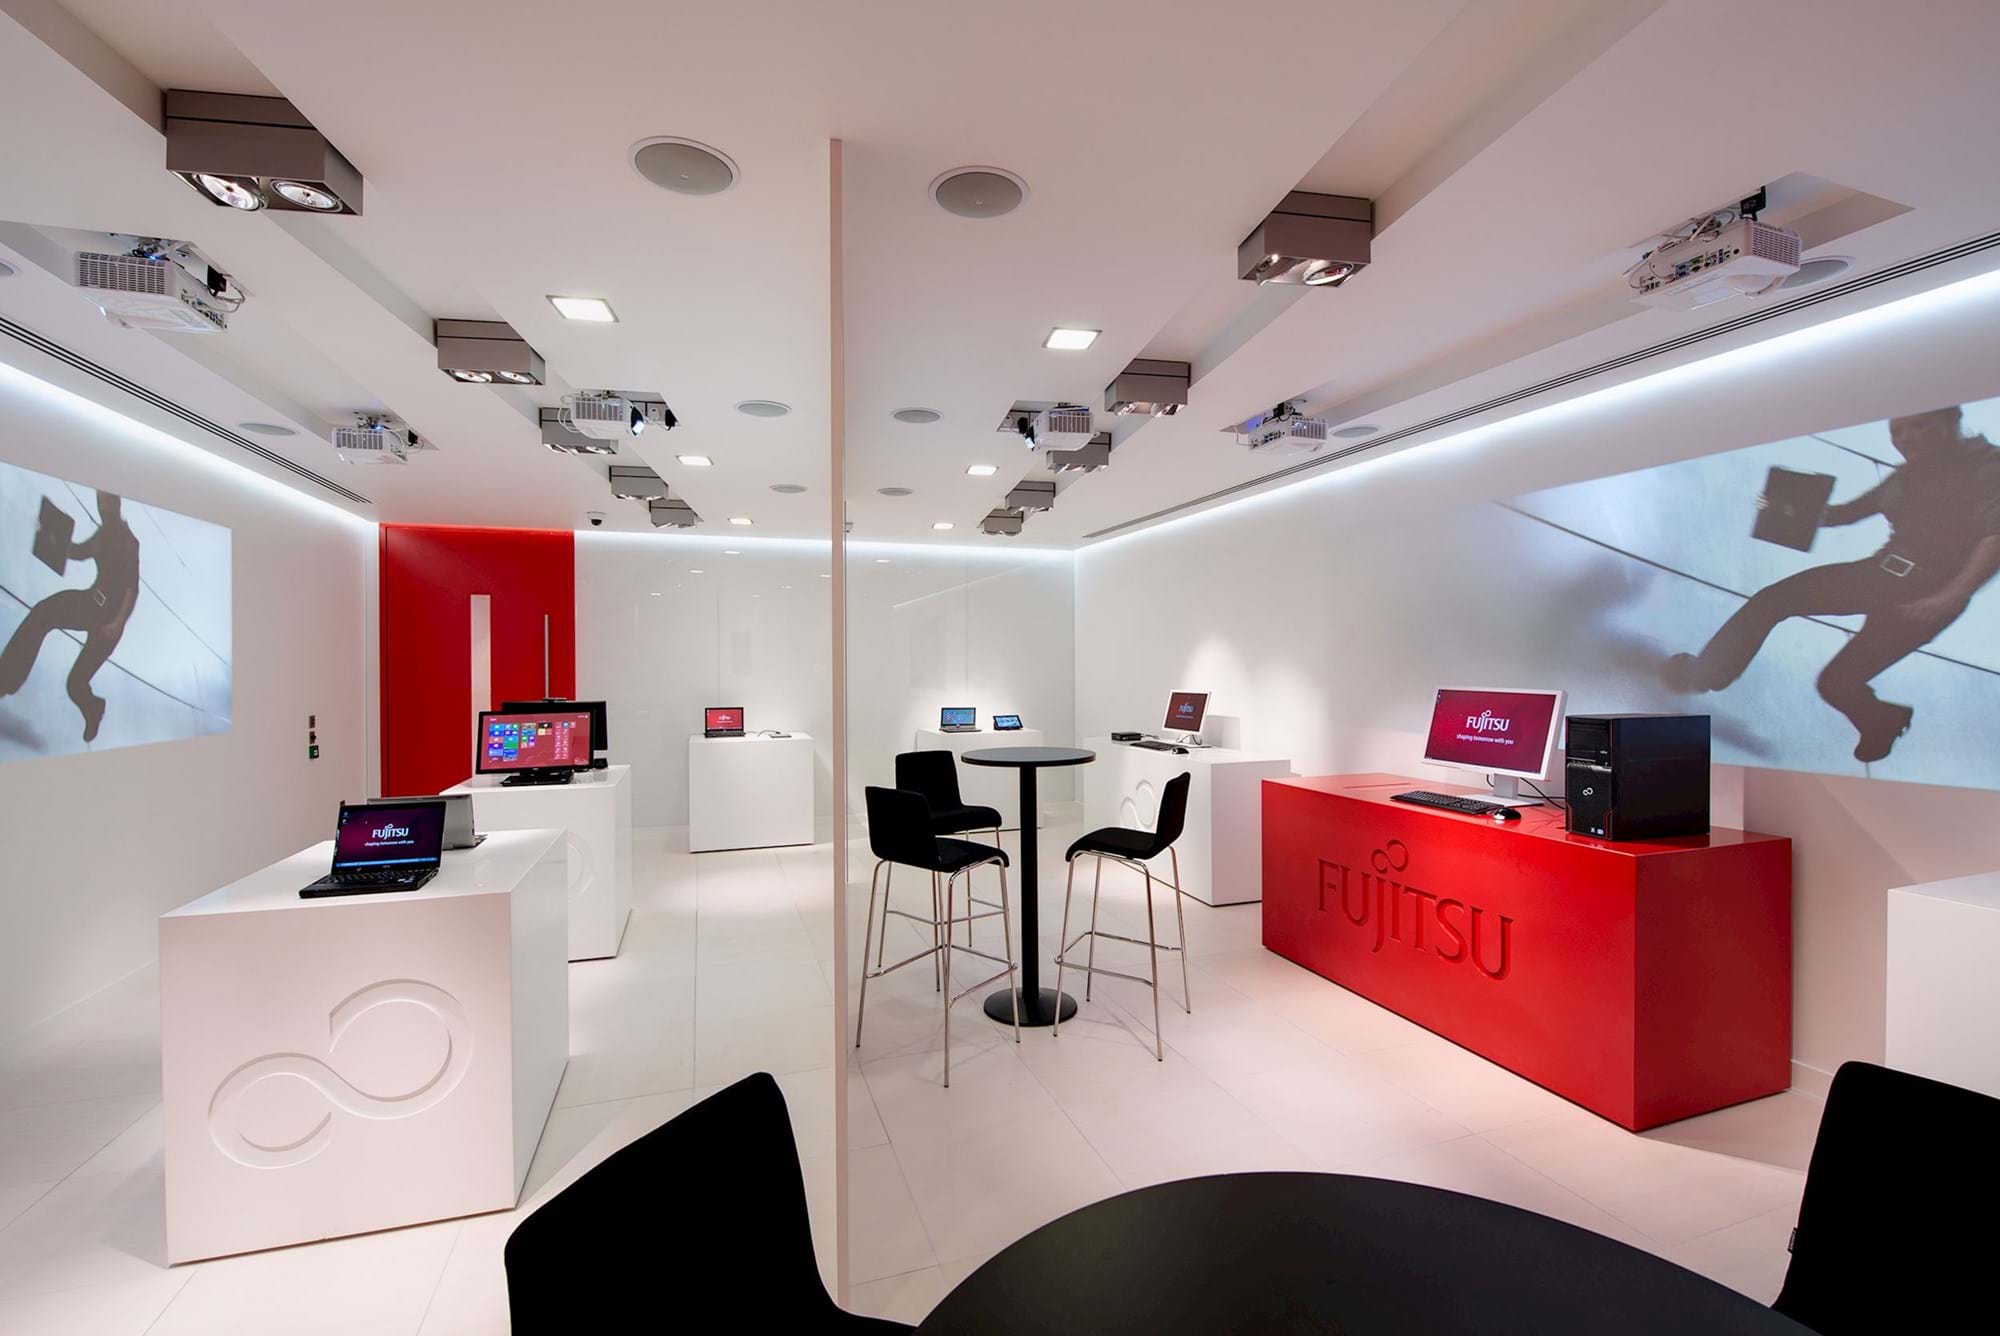 Modus Workspace office design, fit out and refurbishment - LON 22 Innovation Centre - Fujitsu 05 highres sRGB.jpg